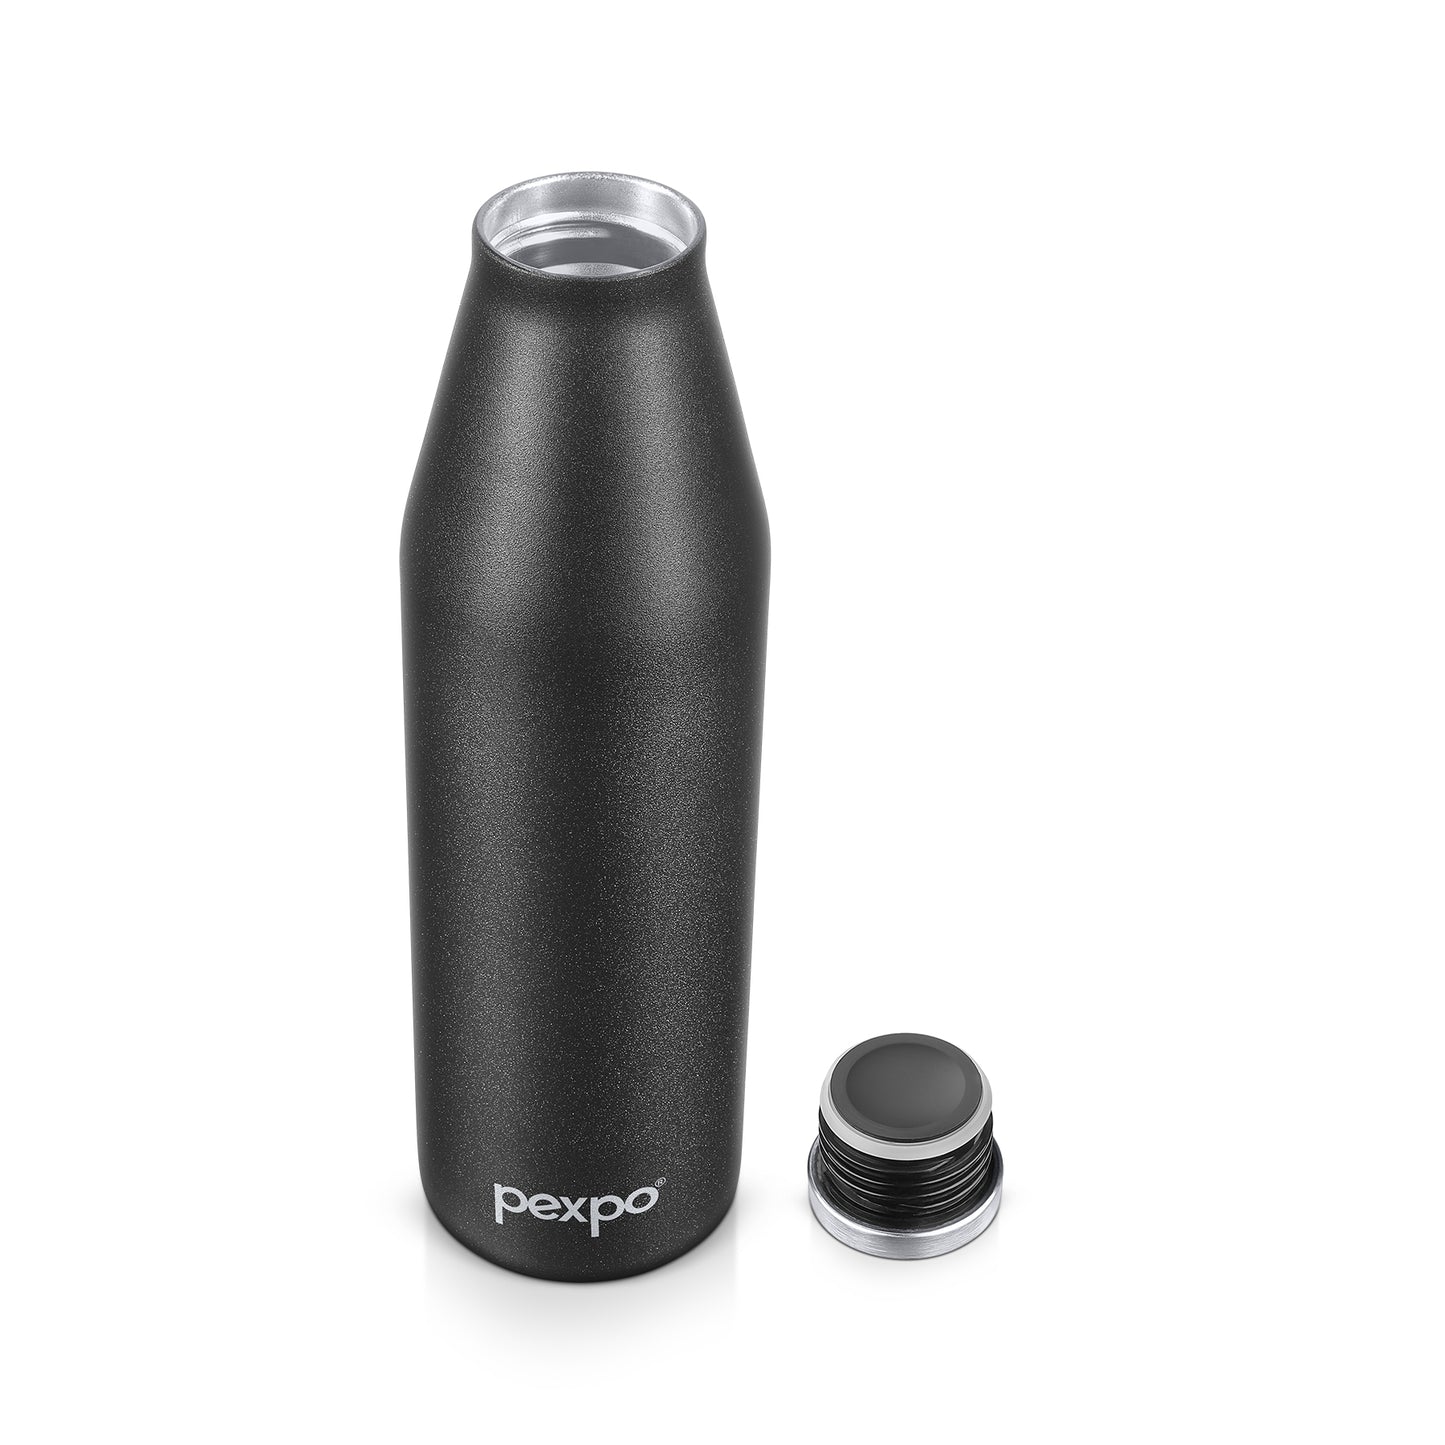 Pexpo Ludo- Stainless Steel Hot and Cold Vacuum Insulated Flask | Lightweight & Keeps Drinks Hot/Cold for 24+ Hours